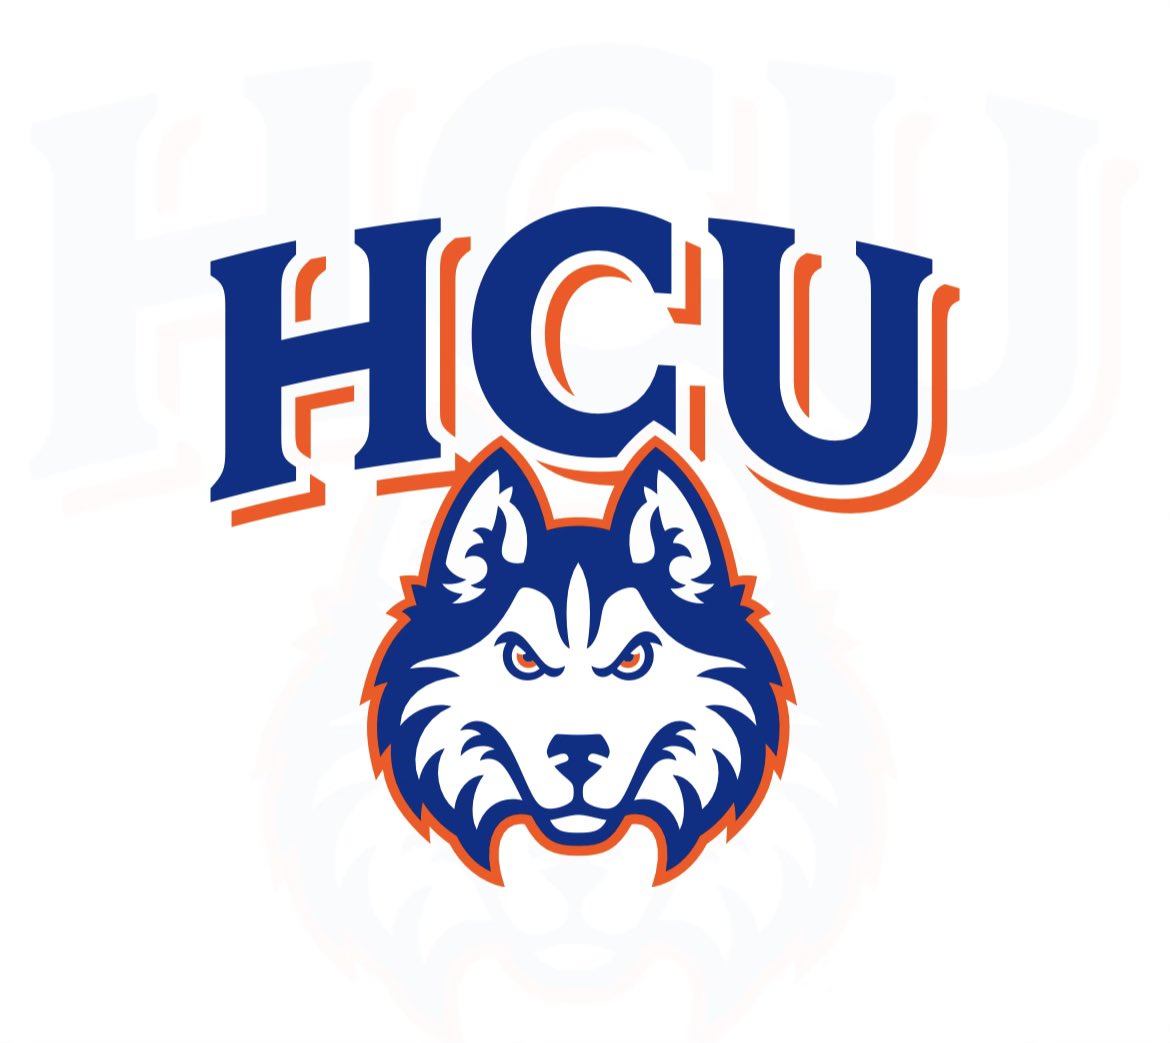 Blessed to receive an offer from Houston Christian university @CoachPetty_ @RivalsNick @RecruitEastside @Rivals